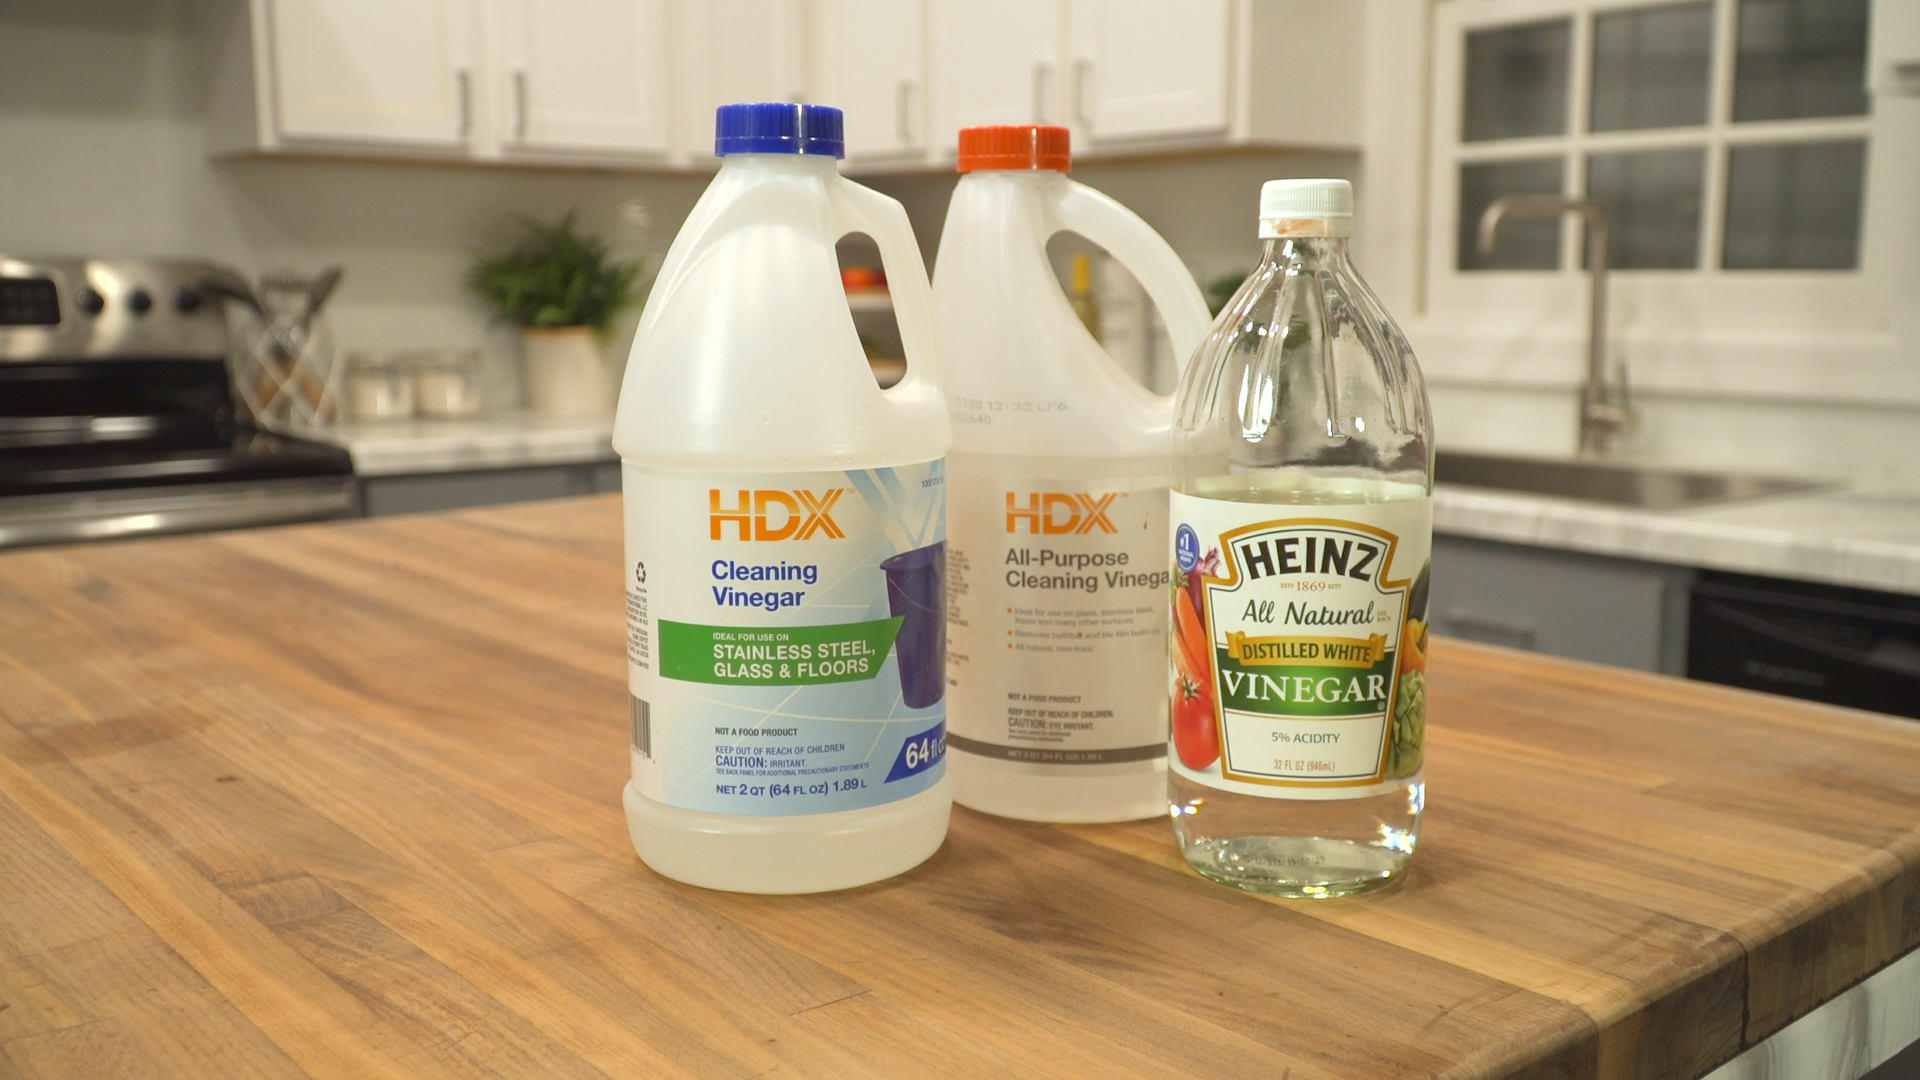 How Does Vinegar Work for Cleaning